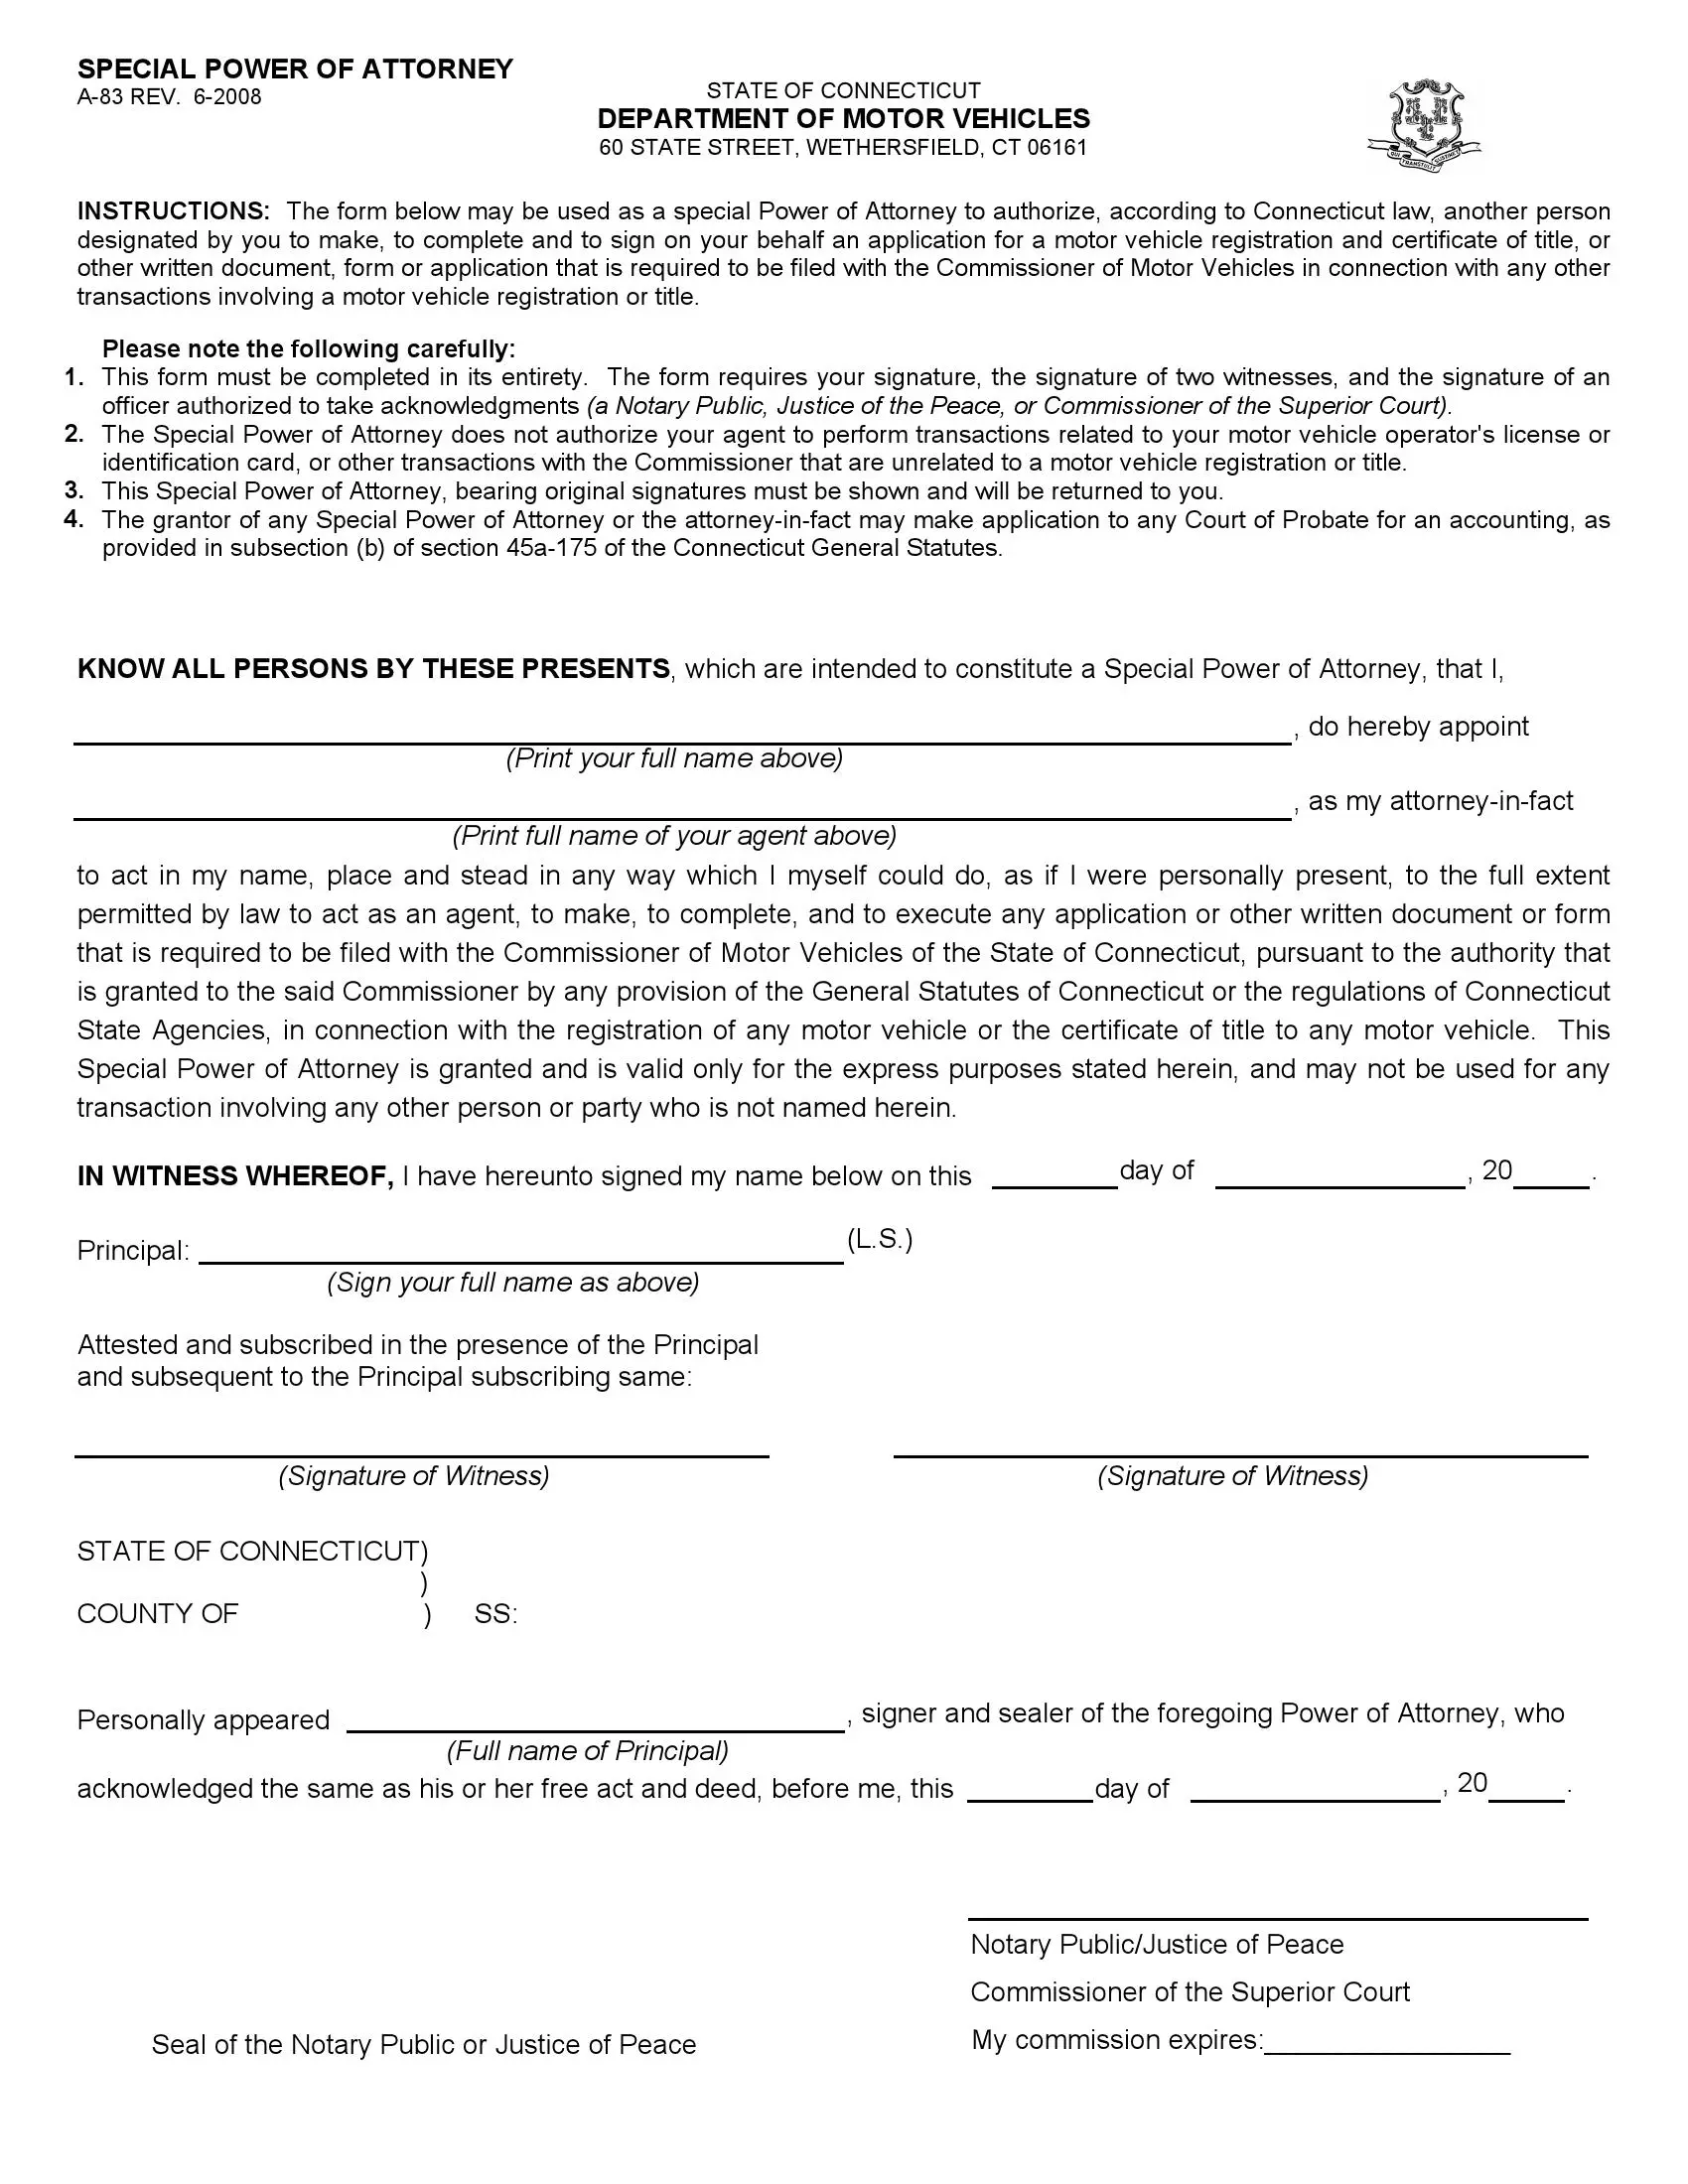 Form A-83